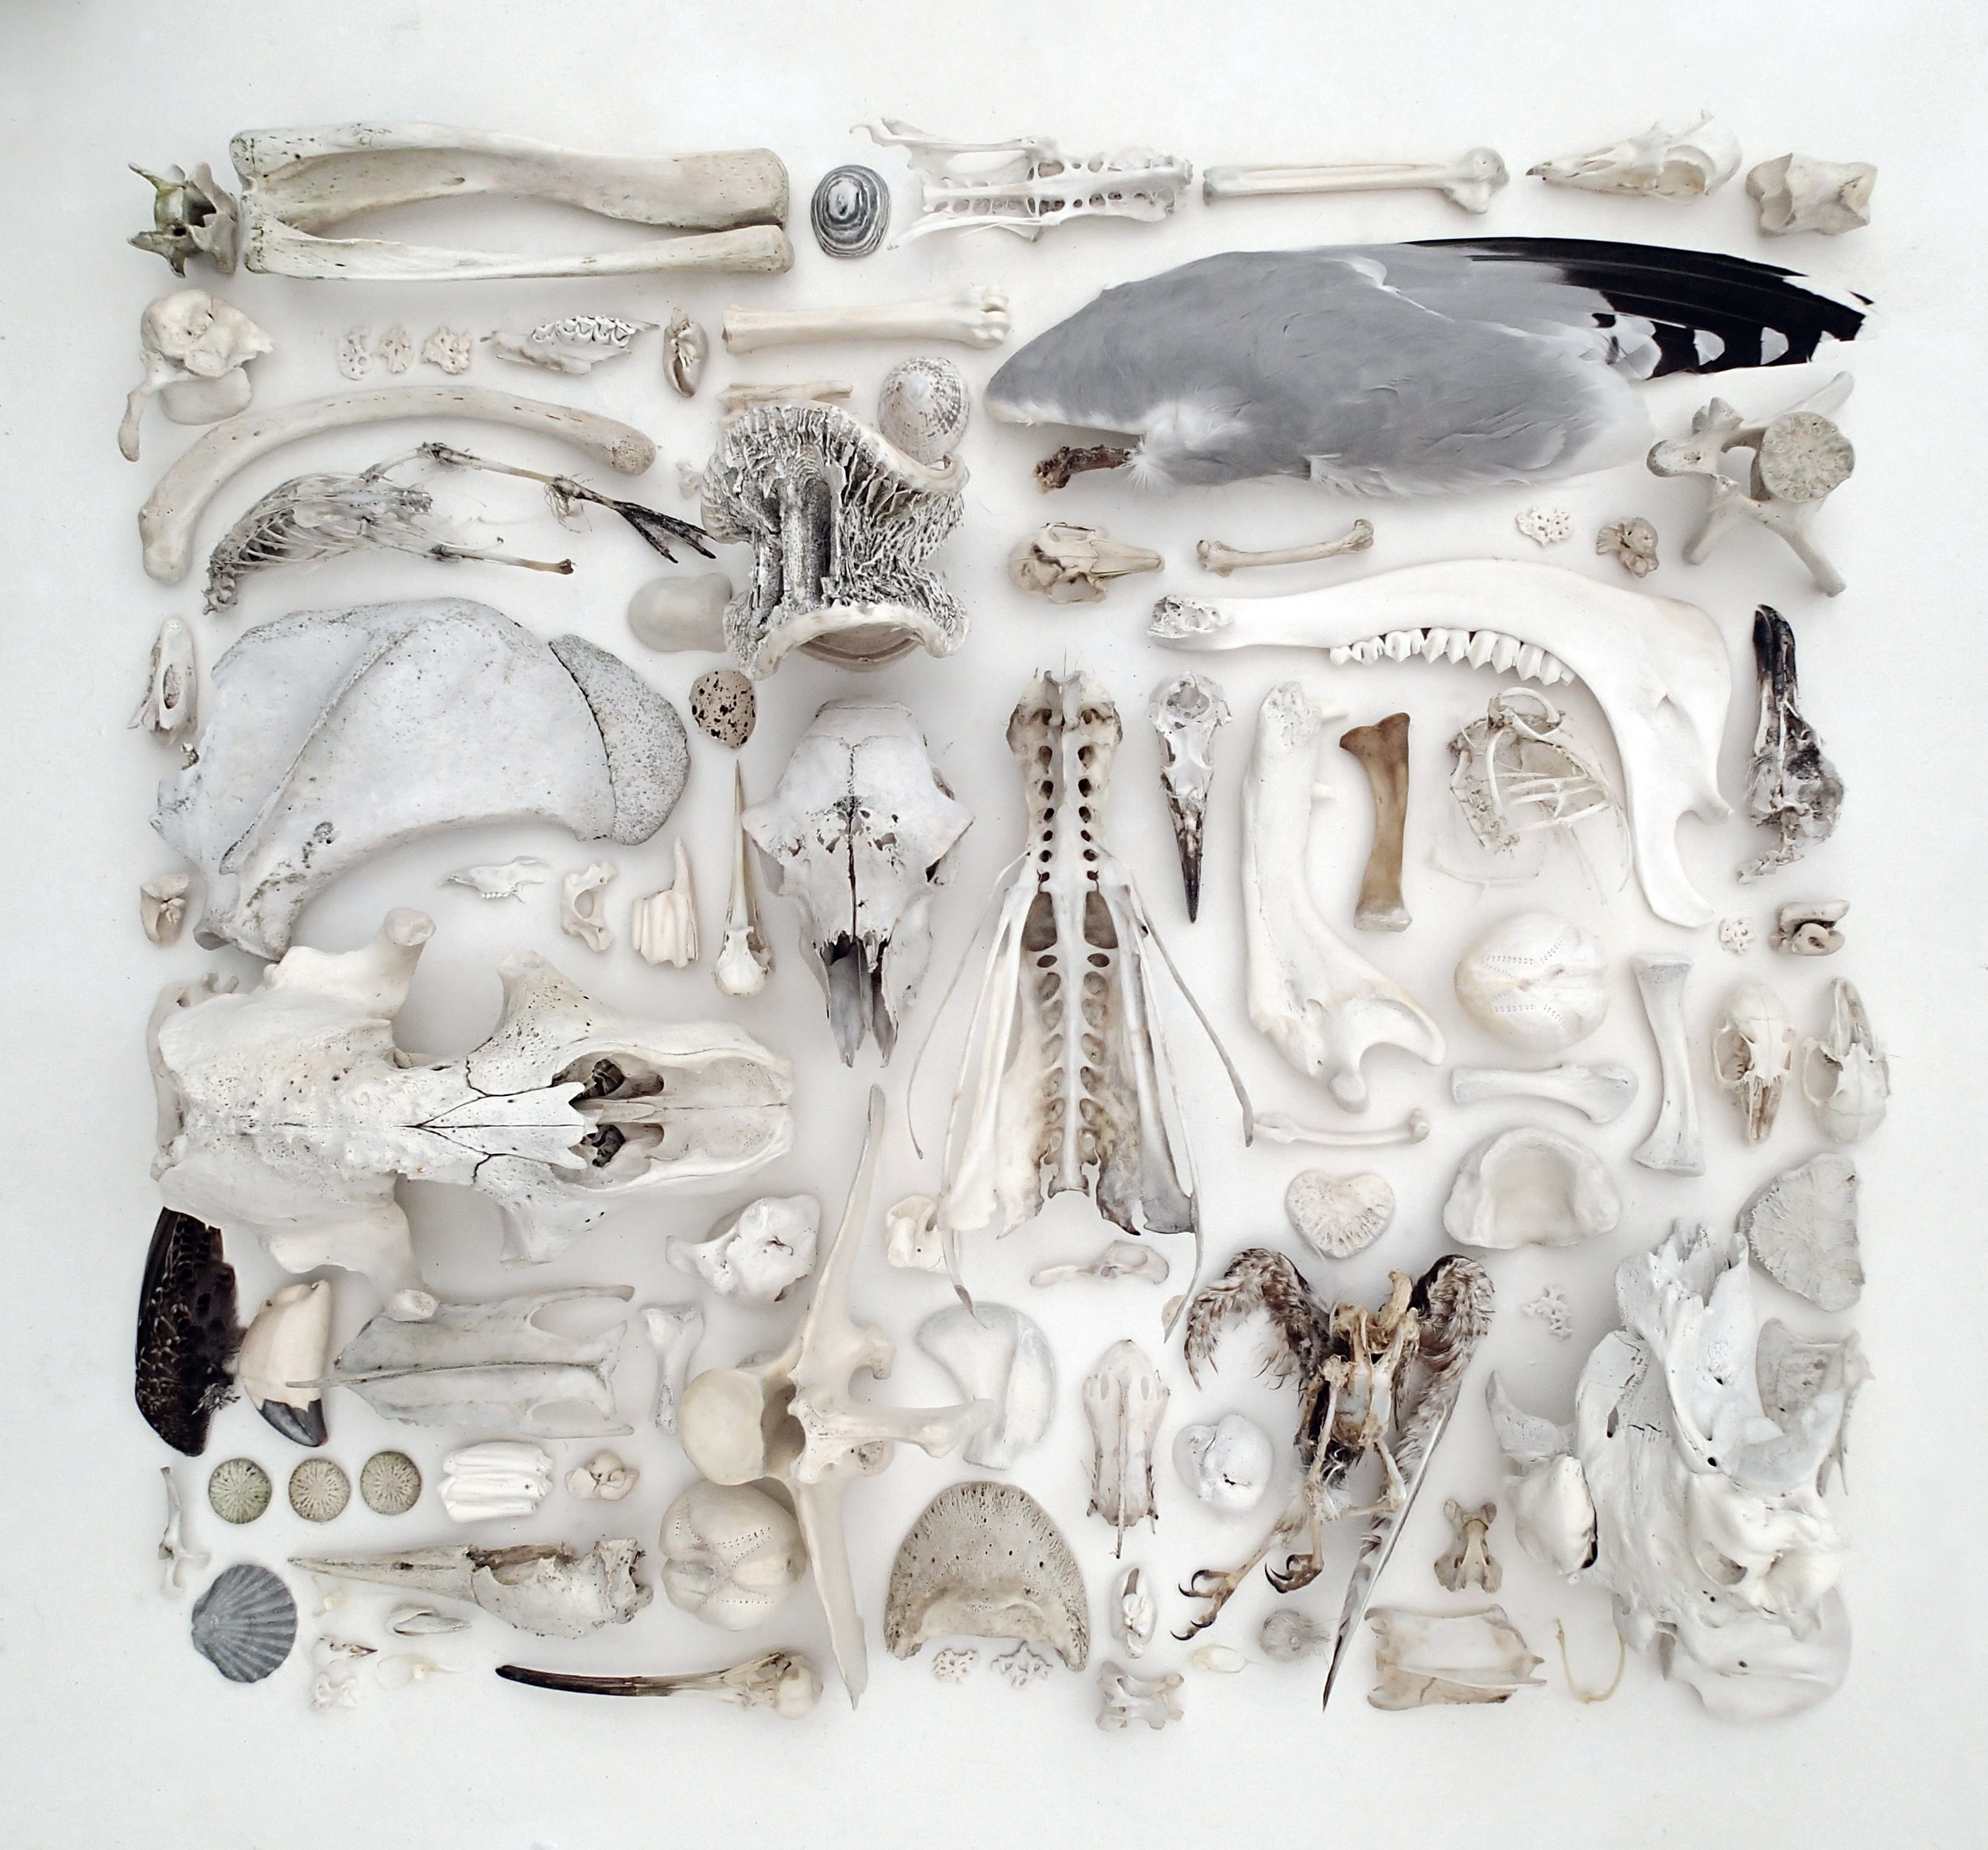  As We Are Now (ii)  Mixed faunal remains, 100 x 100cms, 2014 